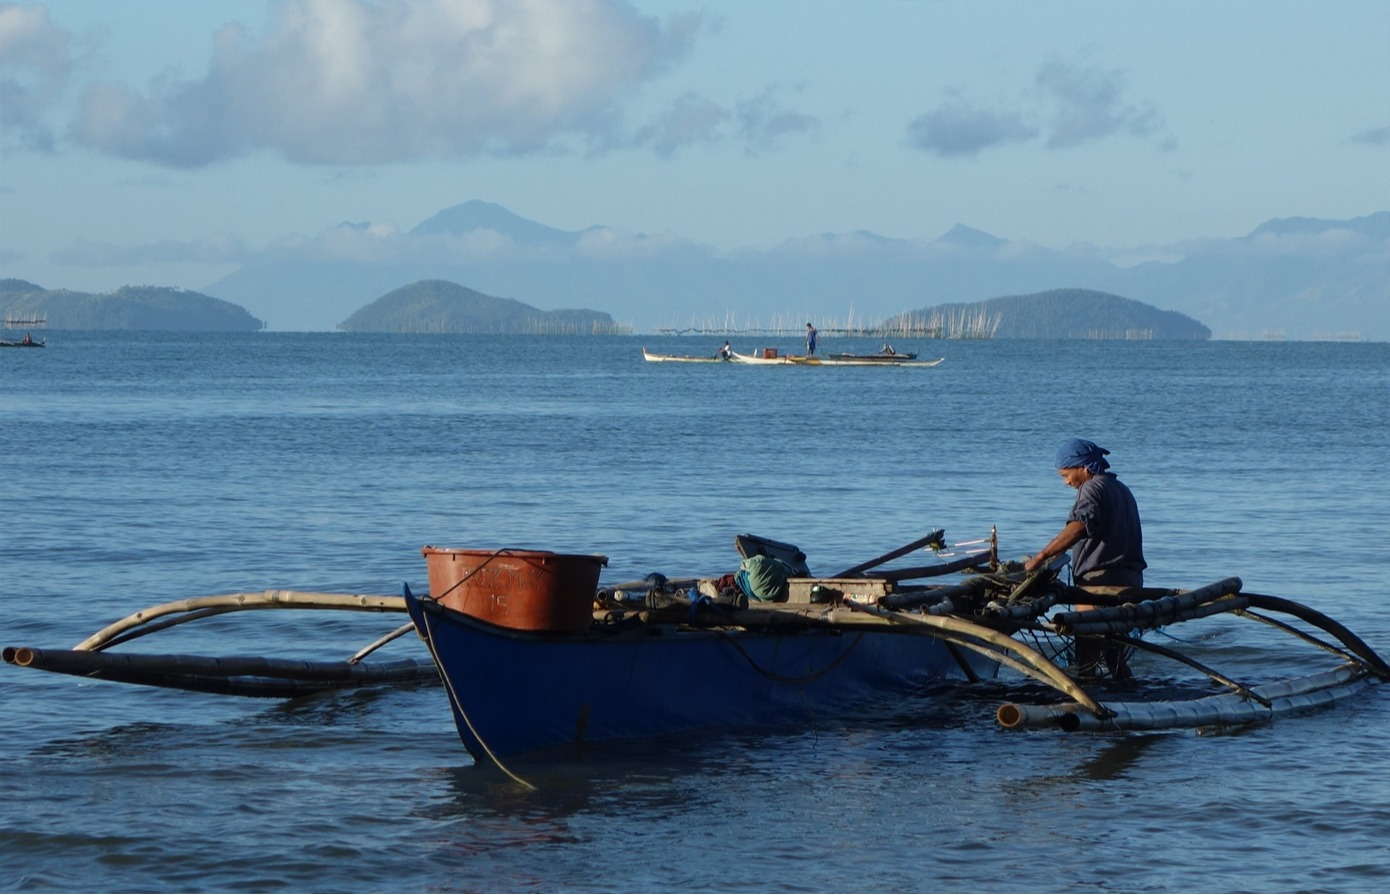 Compiling data on the contributions of small-scale fisheries to sustainable development 